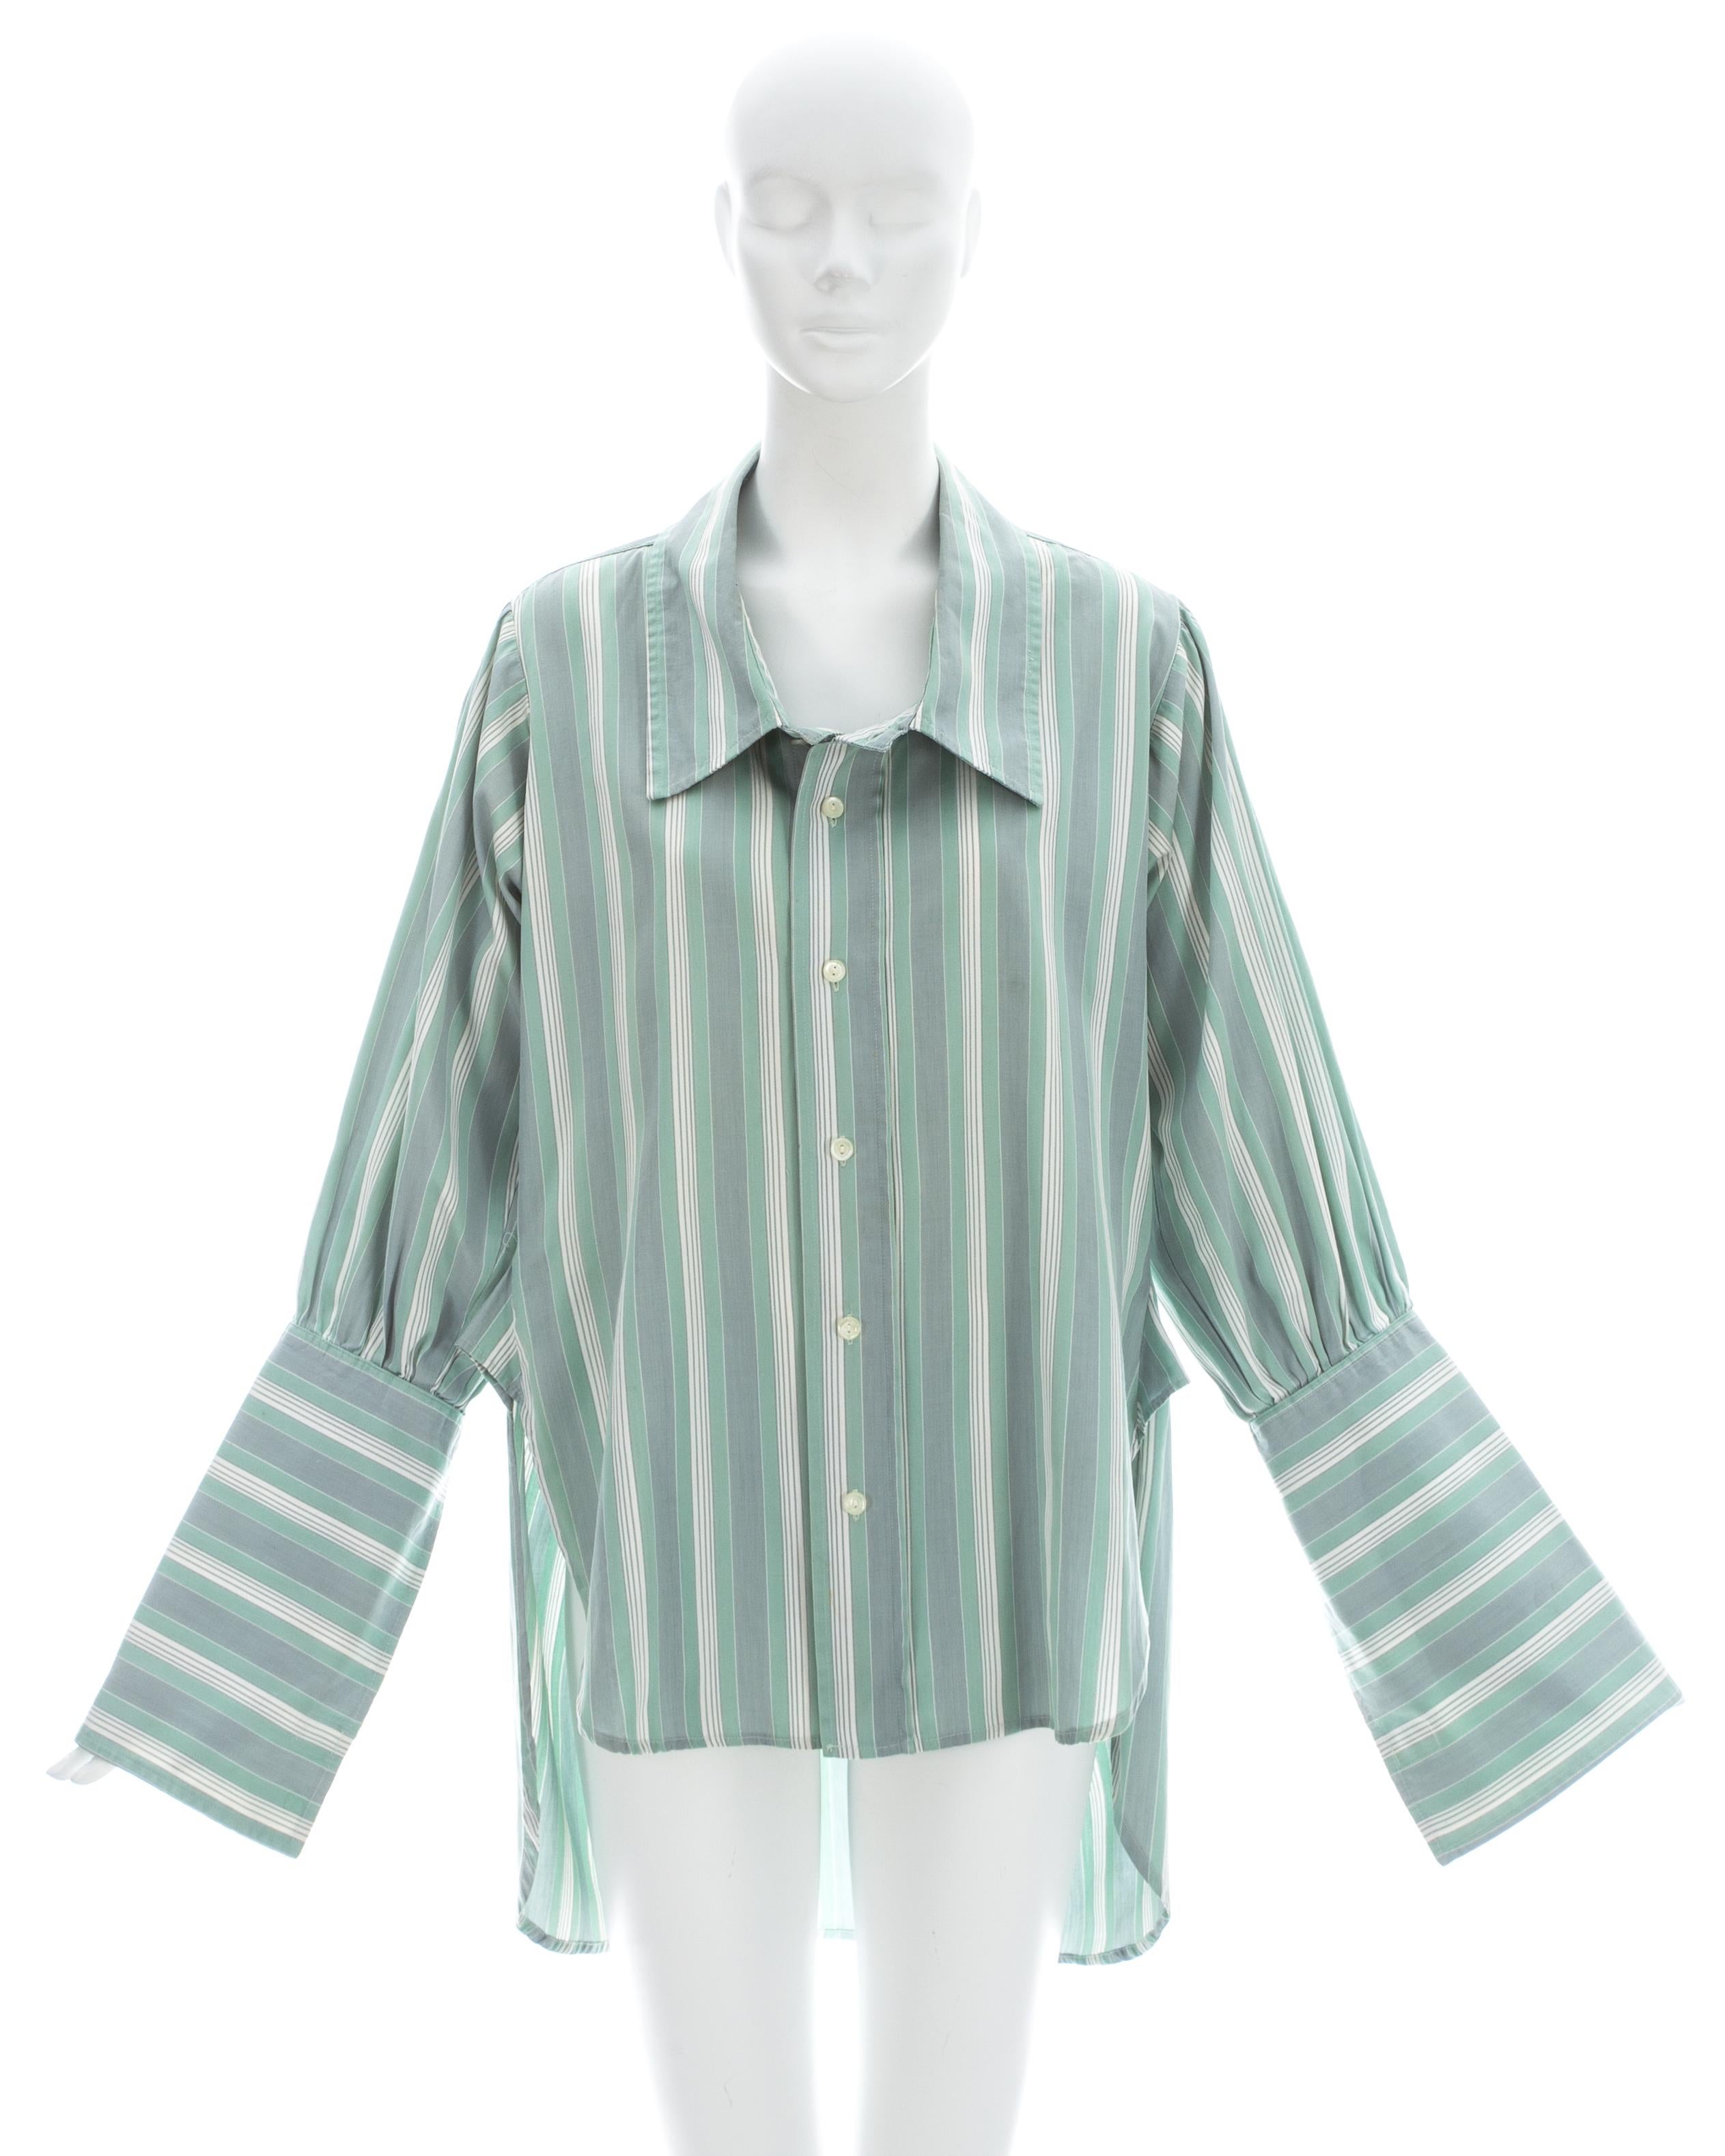 Vivienne Westwood and Malcolm McLaren; Oversized green striped cotton shirt with exaggerated cuffs 

World's End, Spring-Summer 1983
